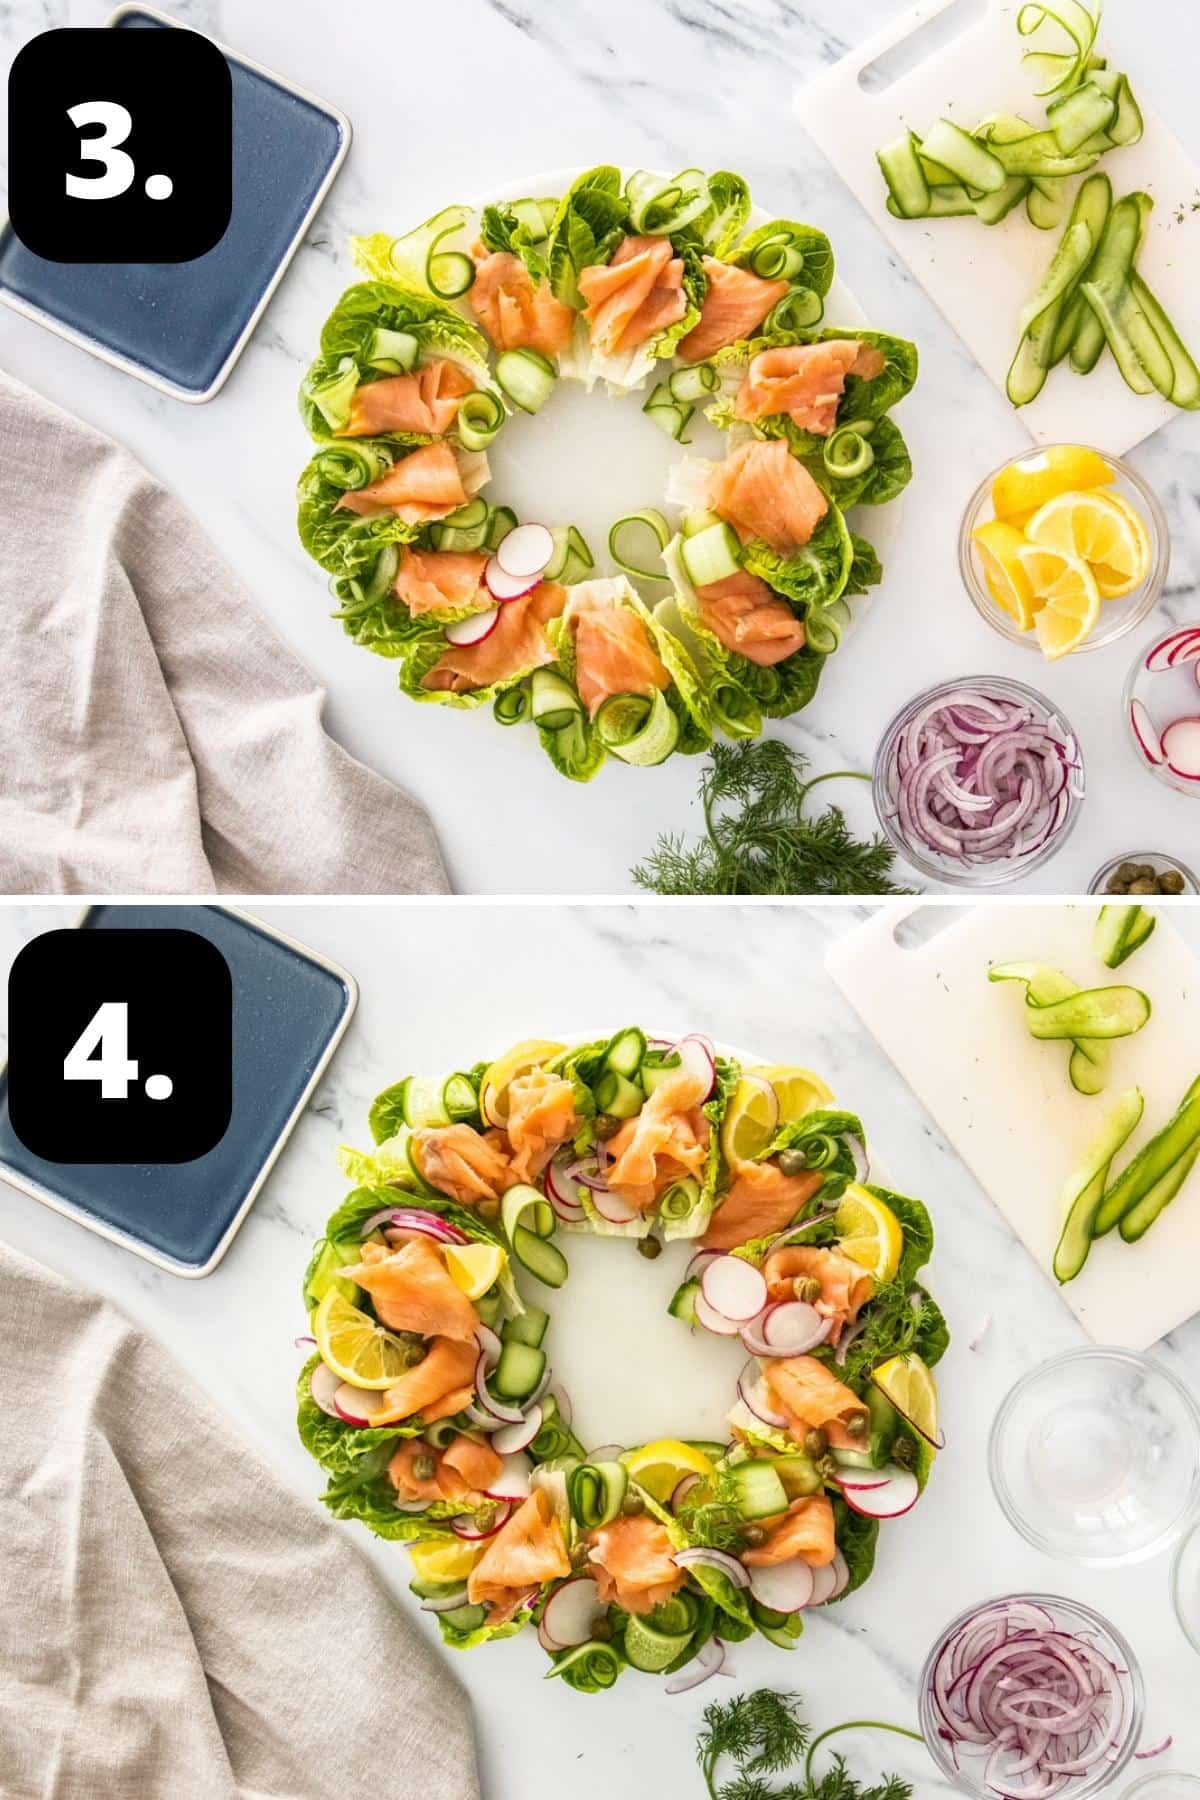 Steps 3-4 of preparing this recipe - adding the other ingredients to the wreath and garnishing with dill sprigs and lemon wedges.